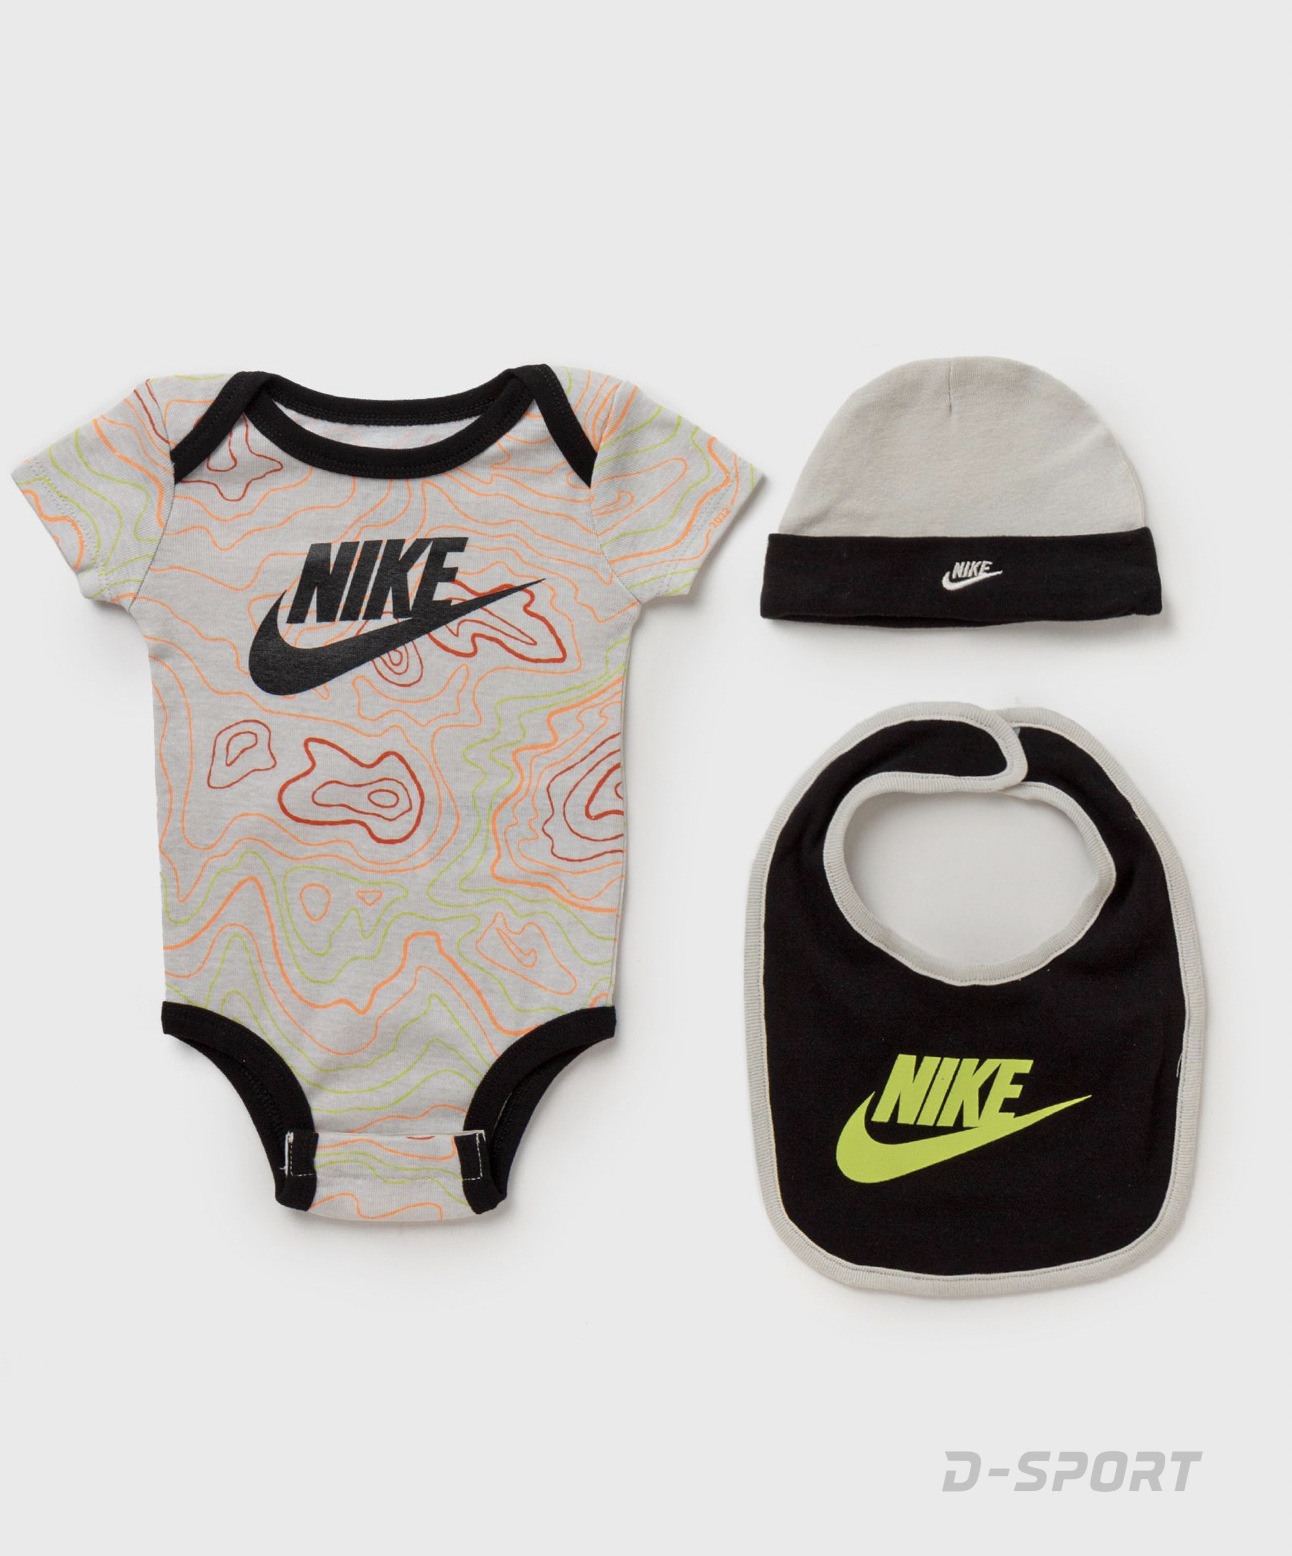 NIKE ELEVATE YOUR GAME BODYSUIT 3PC SET